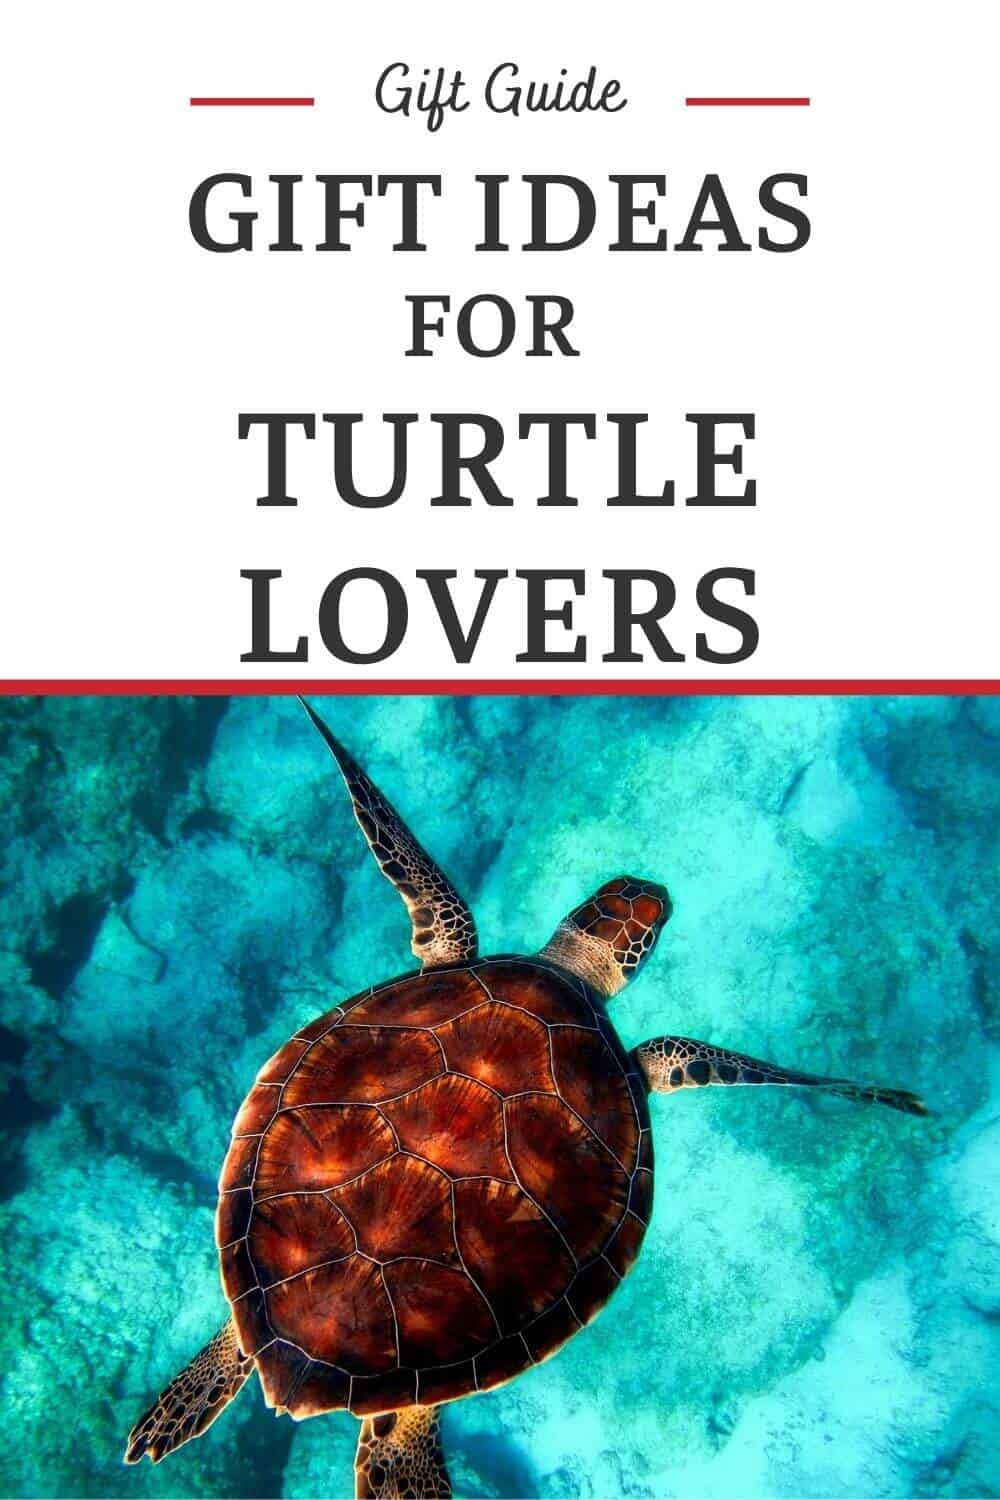 Turtle Gifts - Gifts for People Who Love Turtles